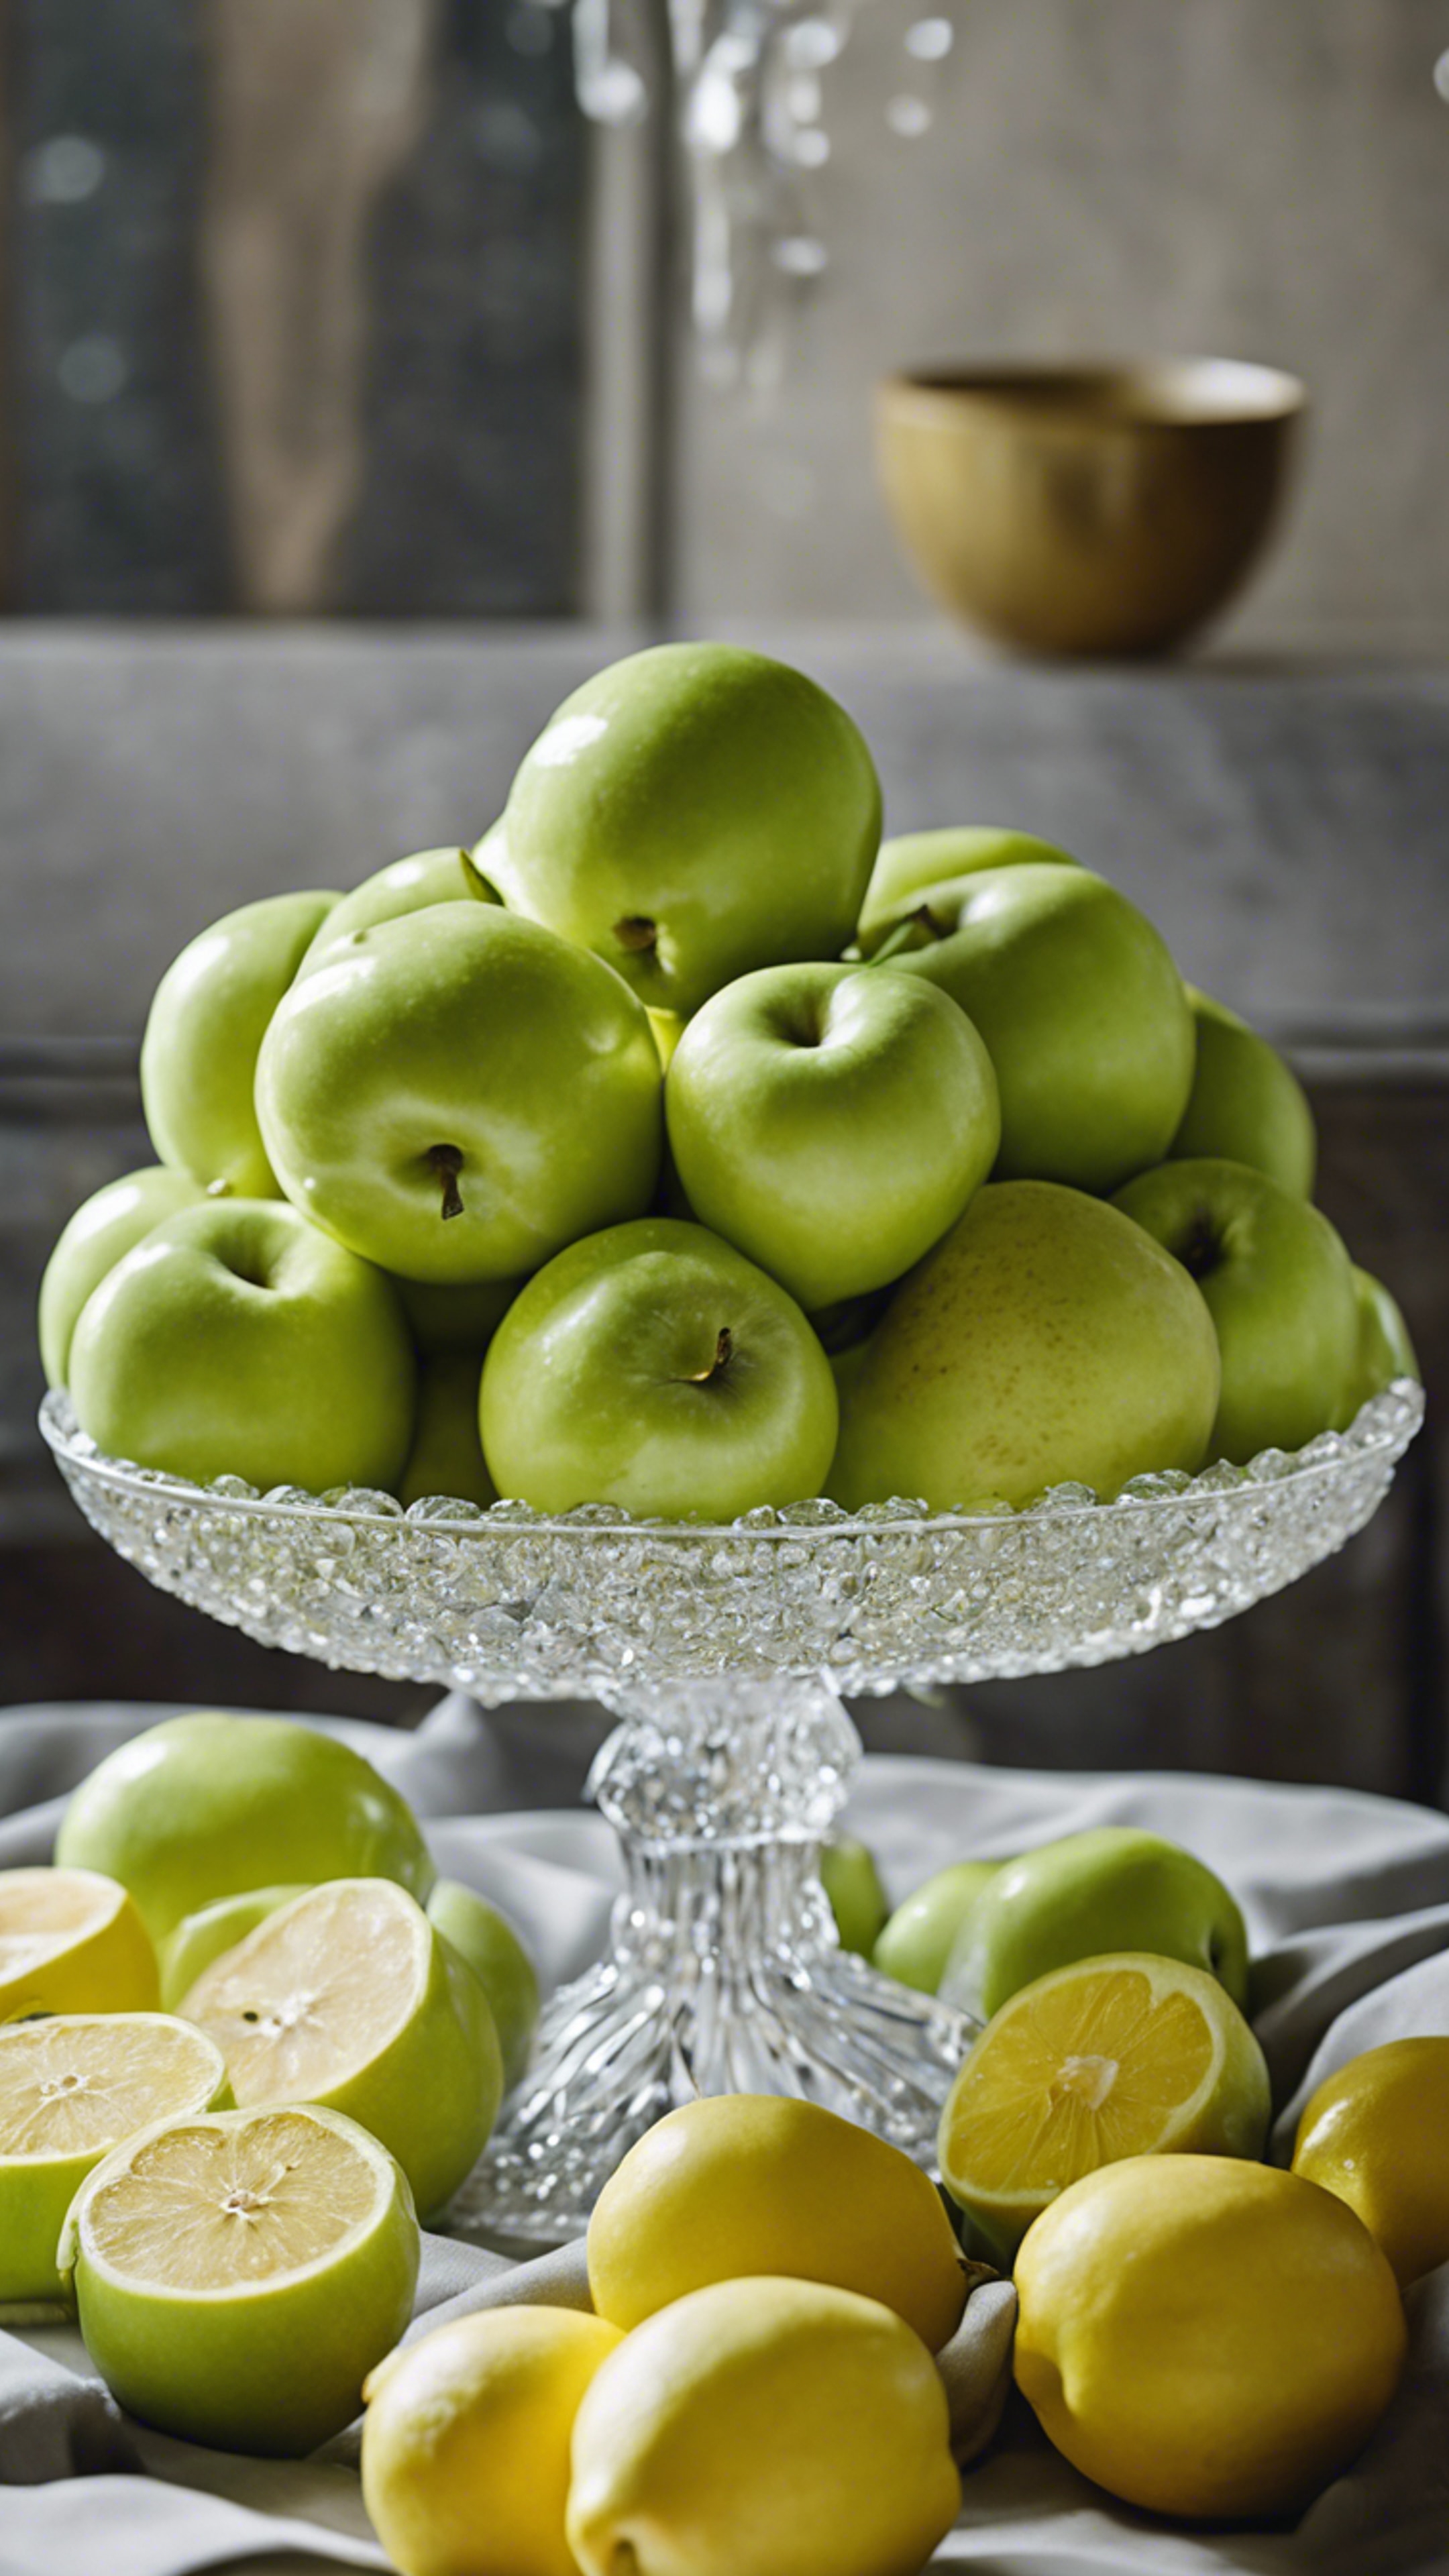 A still life of green apples with yellow lemons arranged in a crystal bowl. Валлпапер[302de0b01c49464c843a]